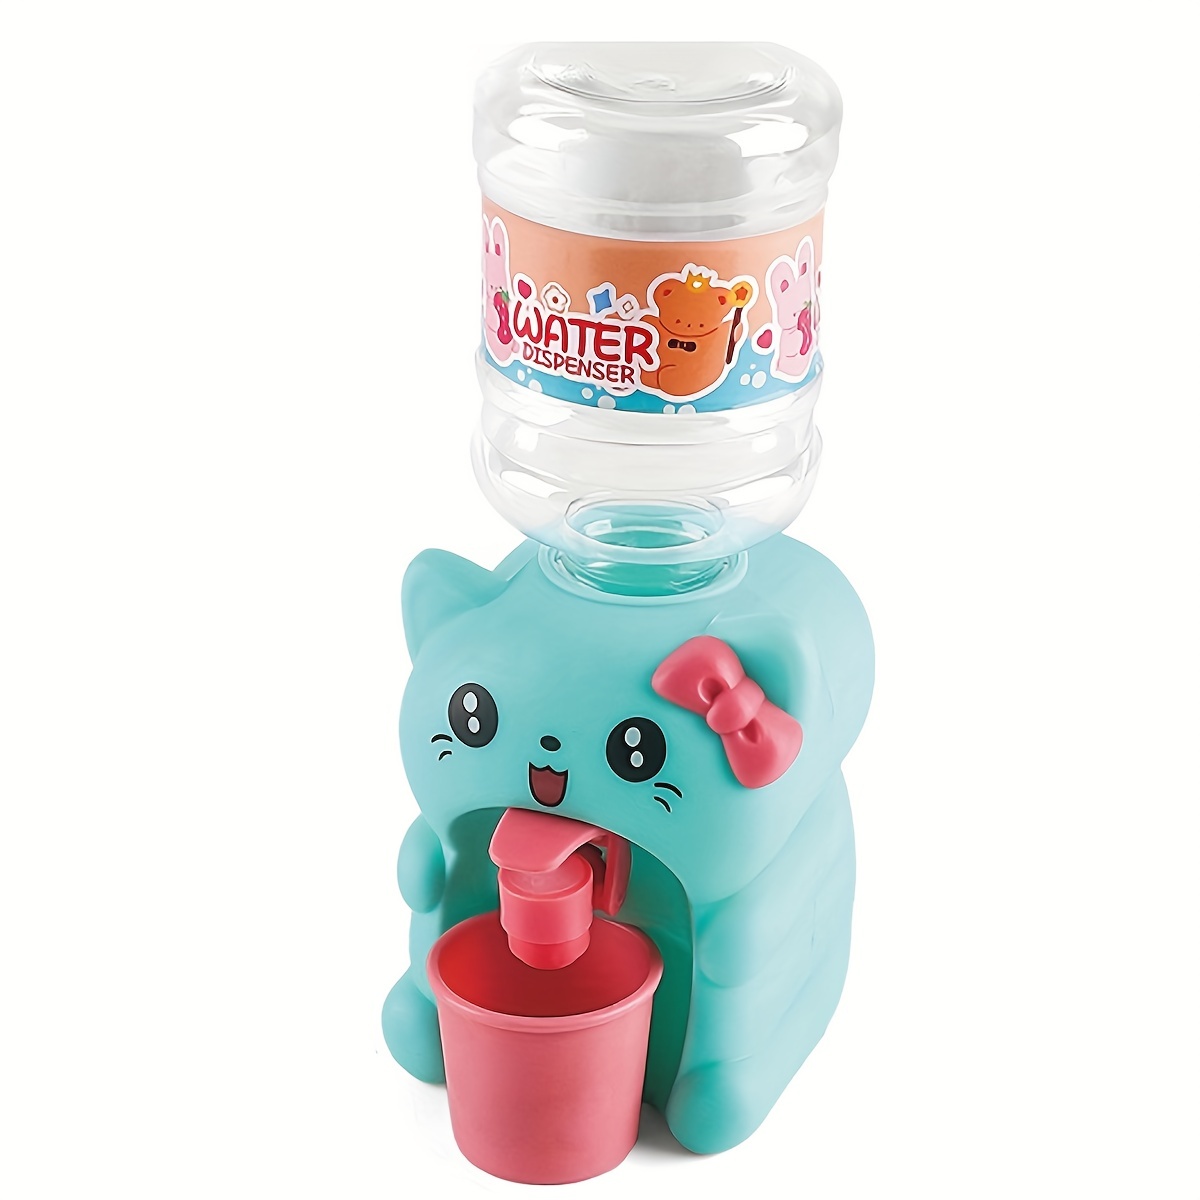 Yoodudes Simulation Fun Little Cute Children's Mini Water Dispenser Toy Water  Dispenser Gifts for family 